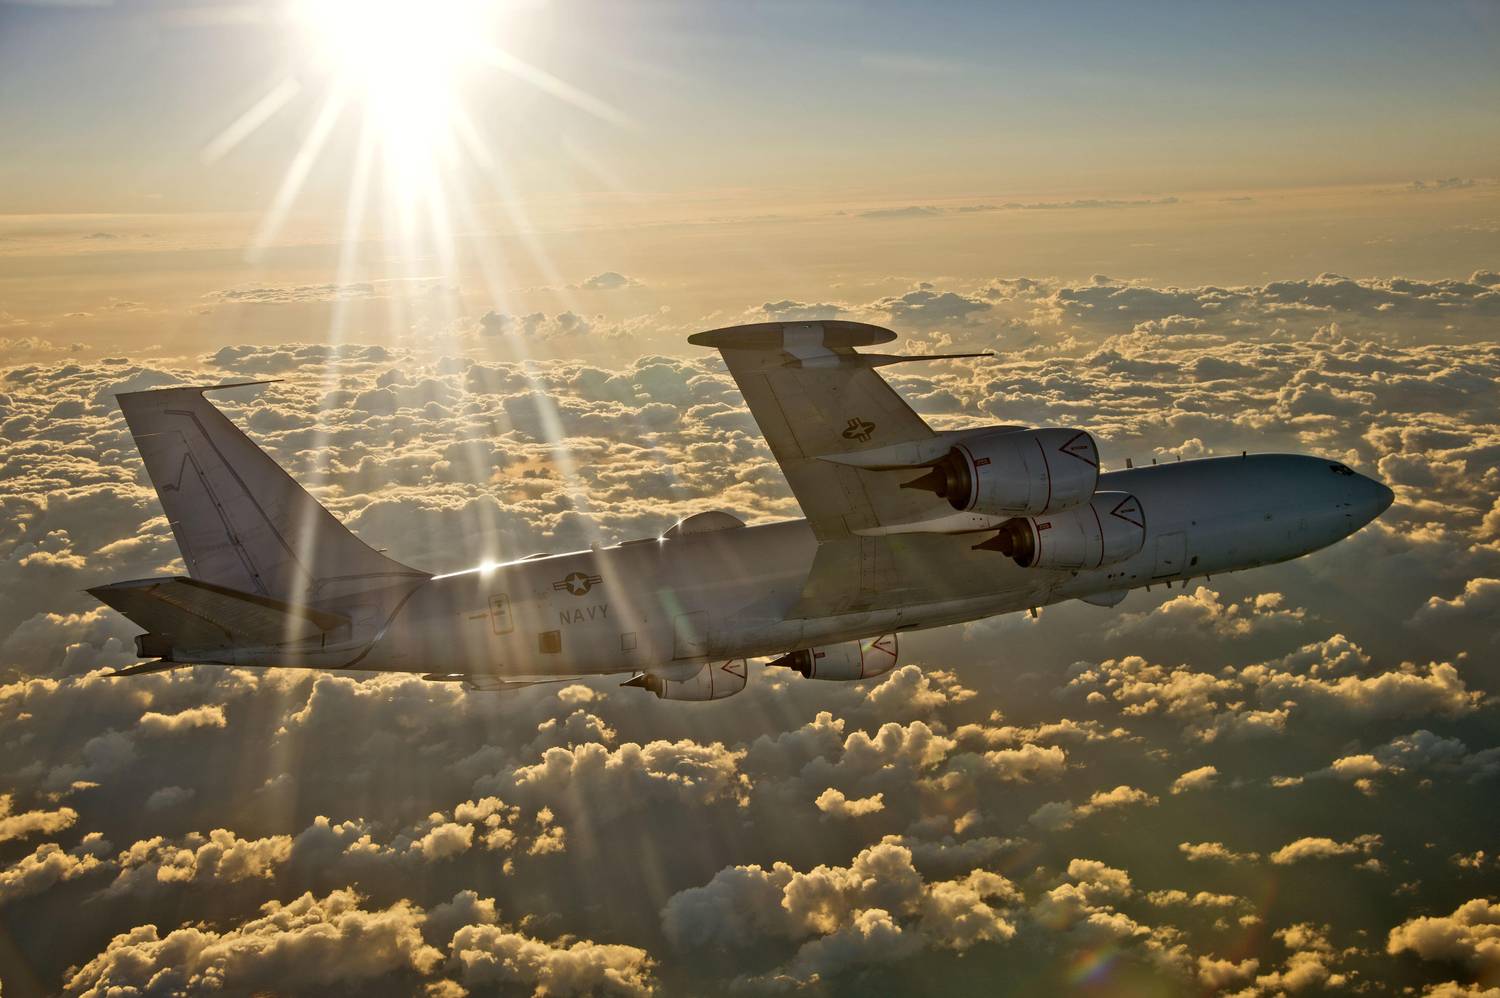 A US Navy Boeing E-6B flying over clouds.